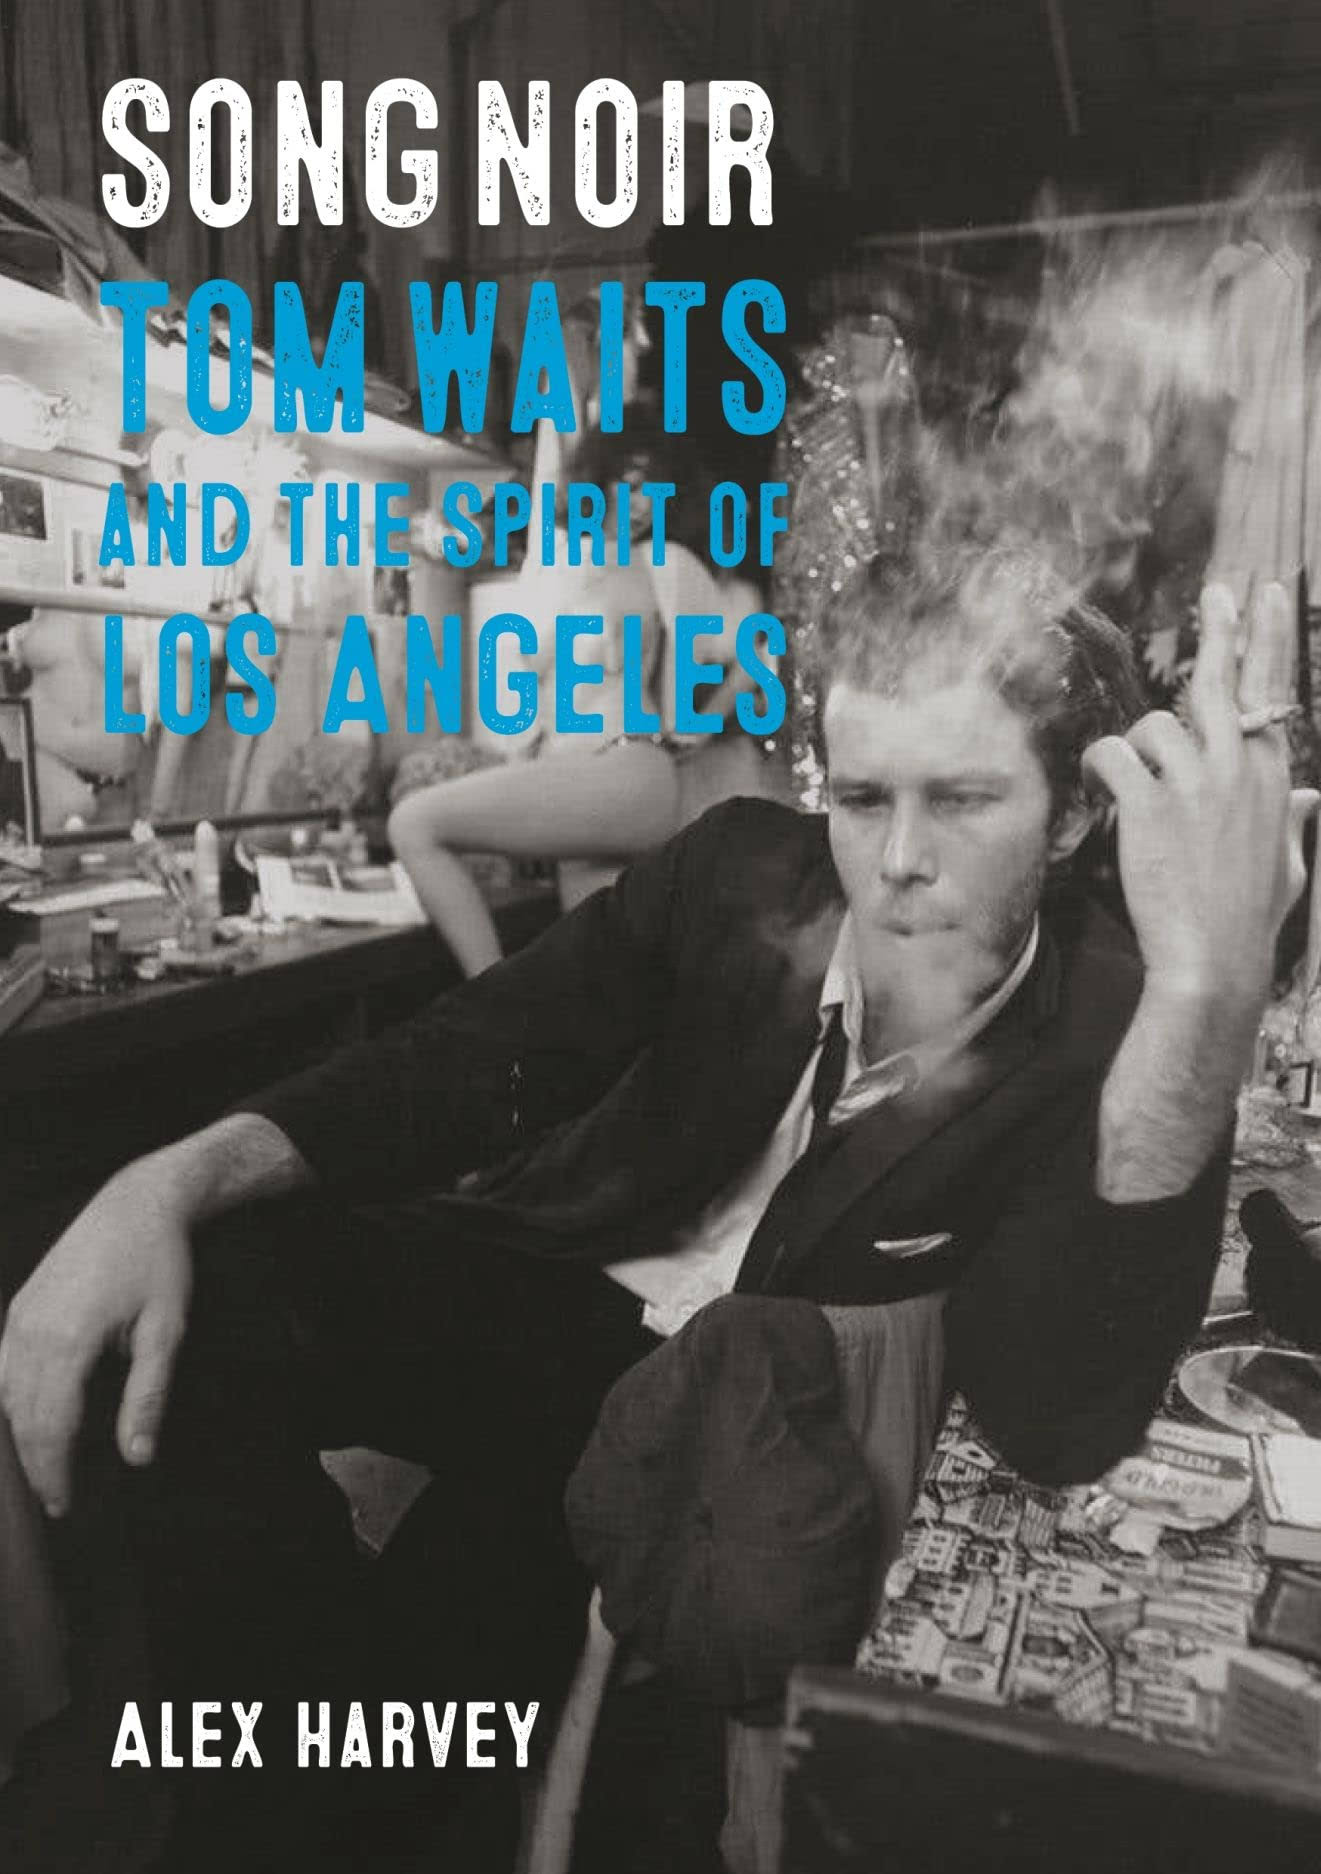 Song Noir: Tom Waits and the Spirit of Los Angeles [Book]